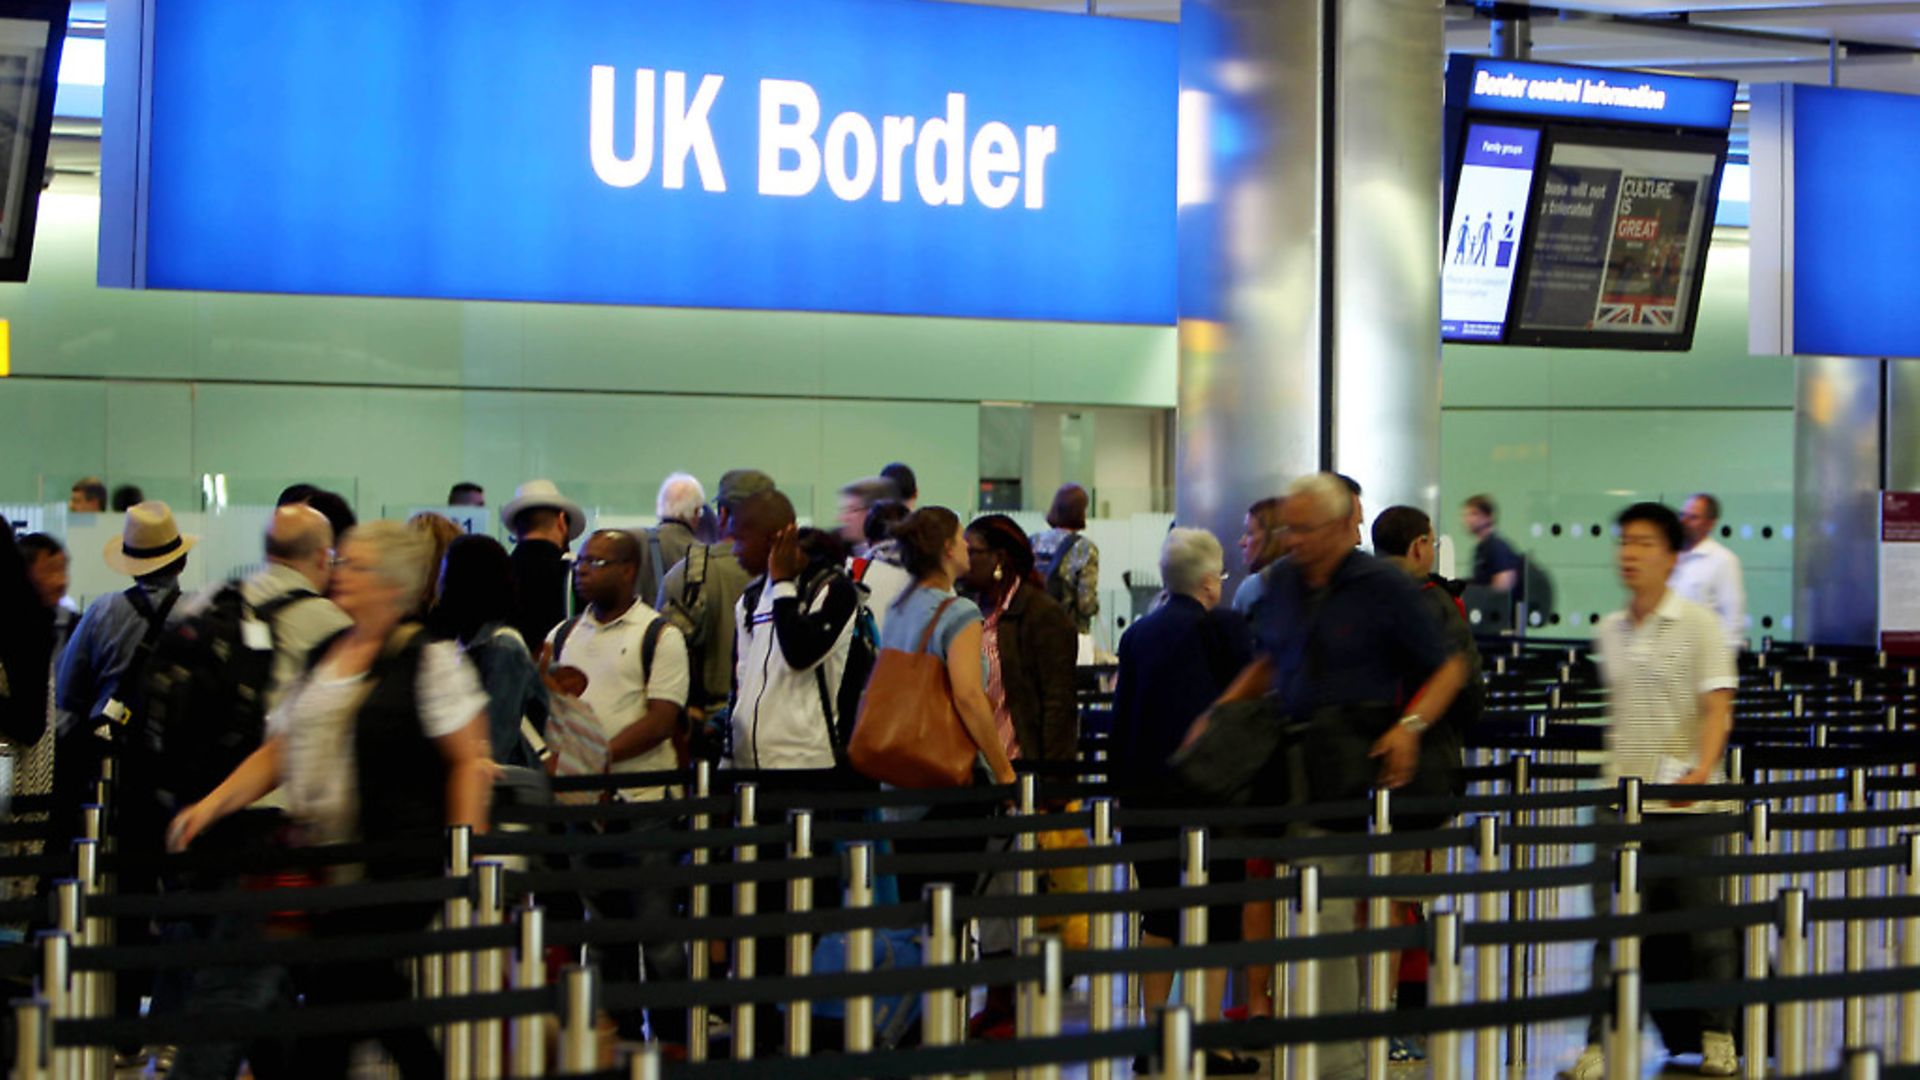 Border control at Heathrow Airport. Photograph: Steve Parsons/PA. - Credit: PA Archive/PA Images